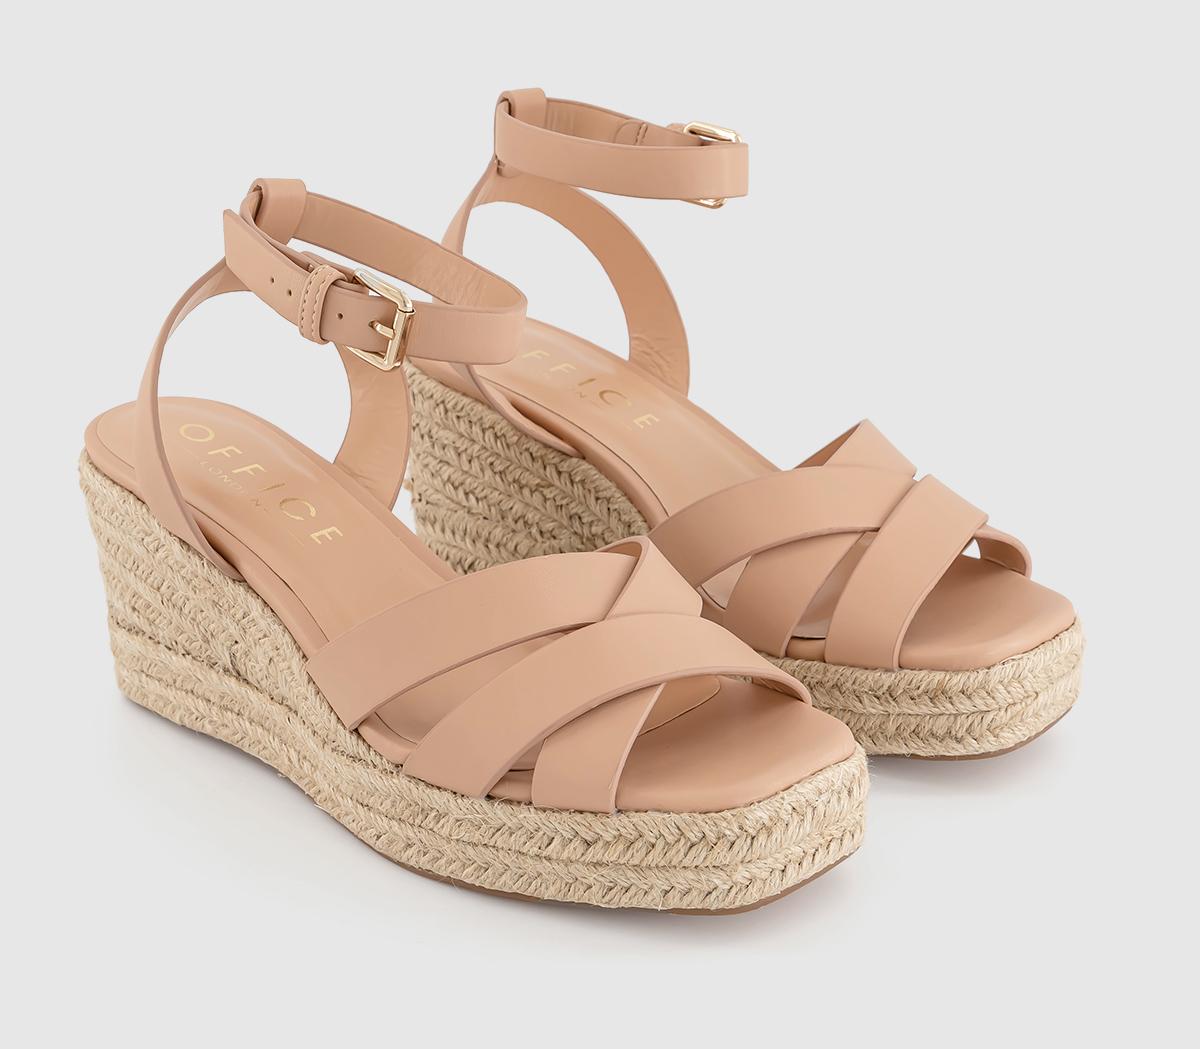 OFFICE Womens Martina Multi Strap Mid Espadrille Wedges Blush Pink, 6